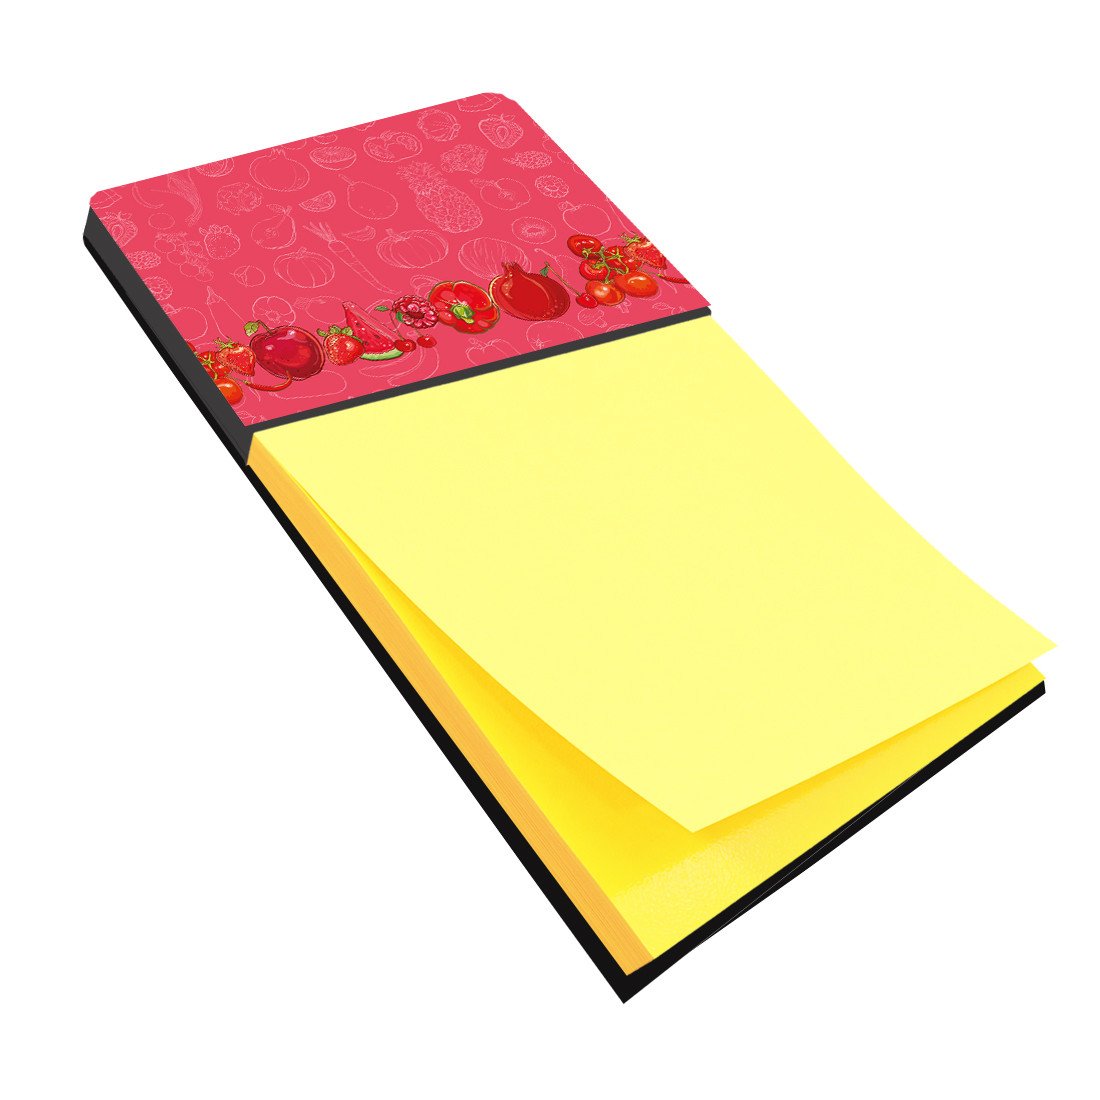 Fruits and Vegetables in Red Sticky Note Holder BB5133SN by Caroline's Treasures